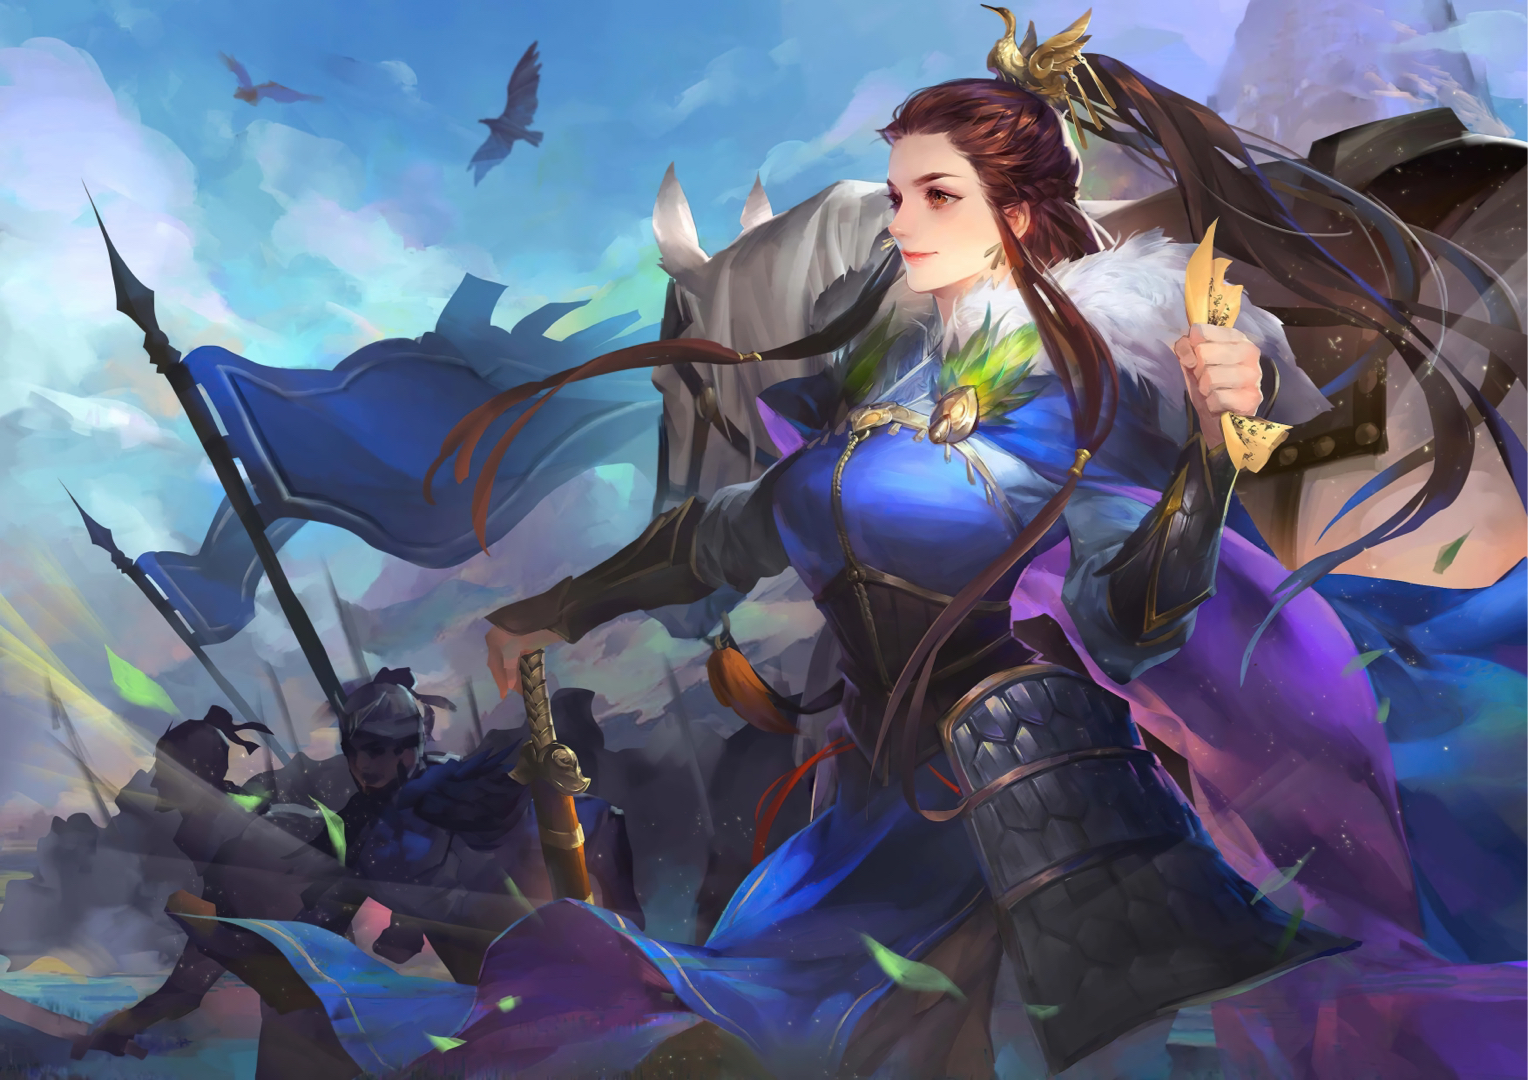 Video Game Characters Three Kingdoms Video Games Video Game Art Video Game Girls Video Game Man Armo 1528x1080